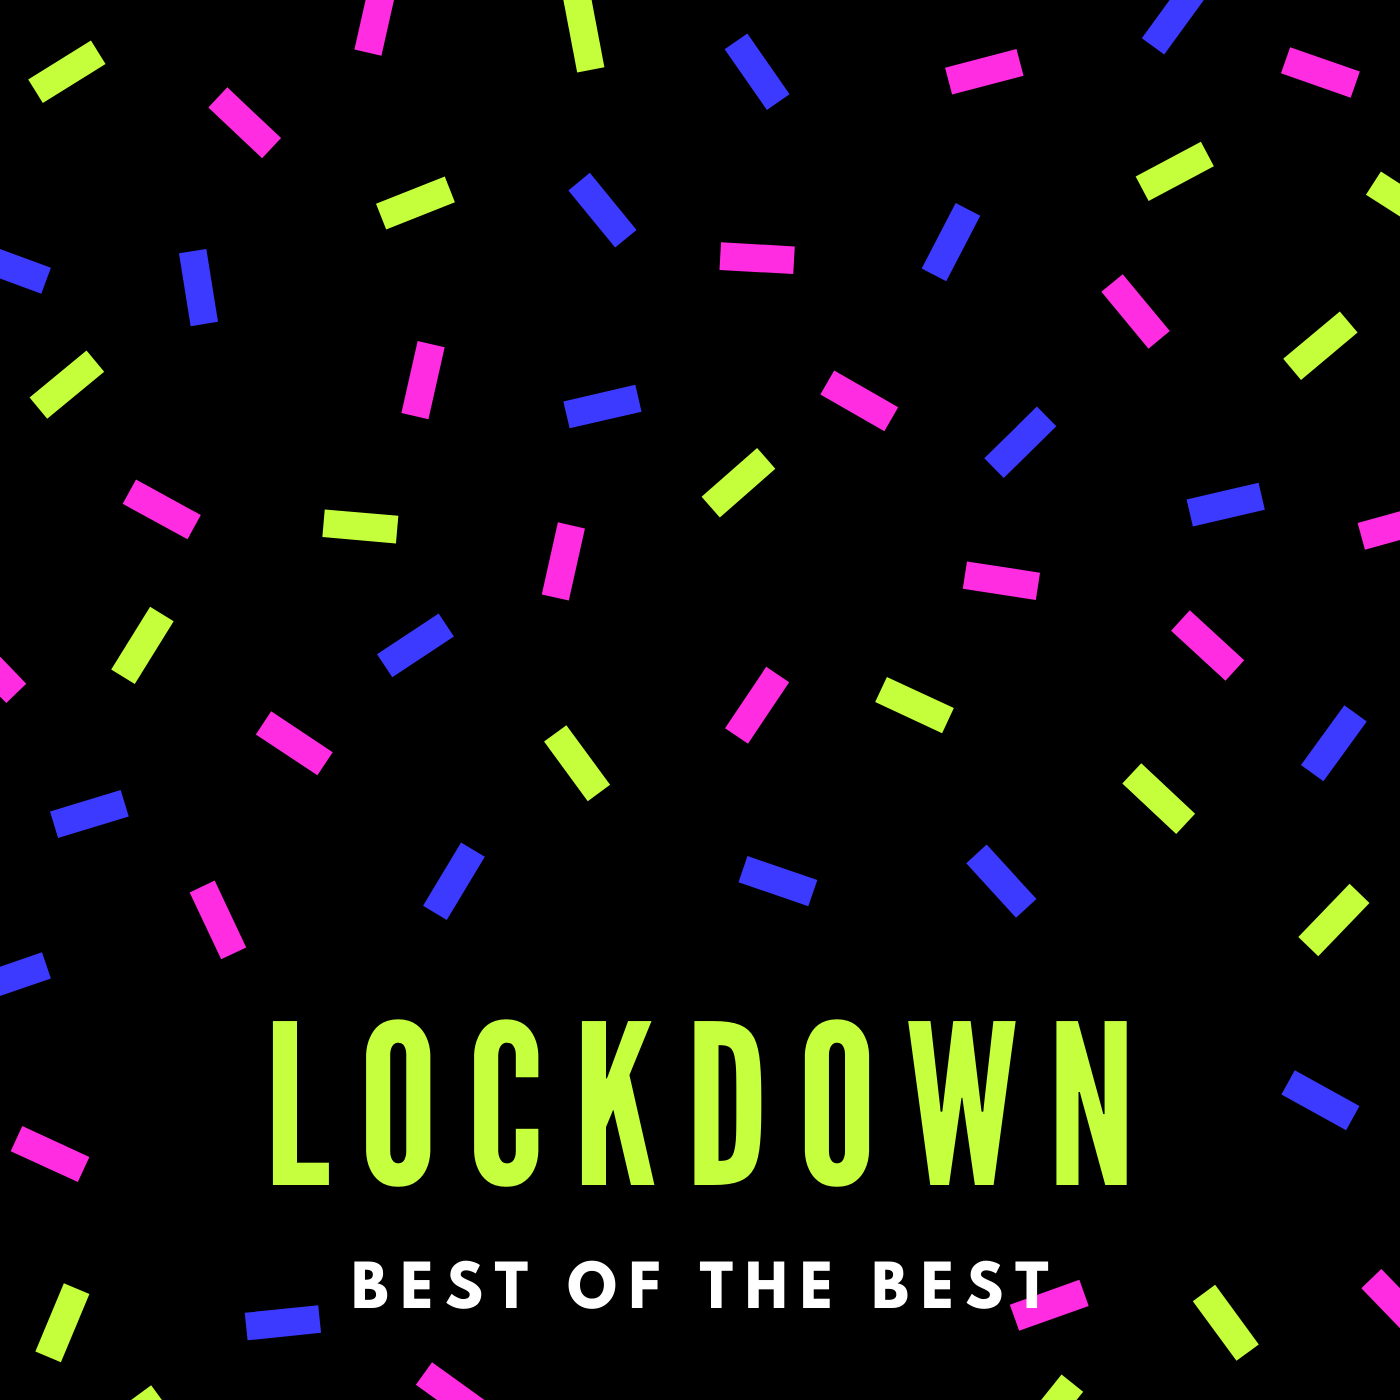 Top 5 Lockdown Parties, Sessions And Mixes